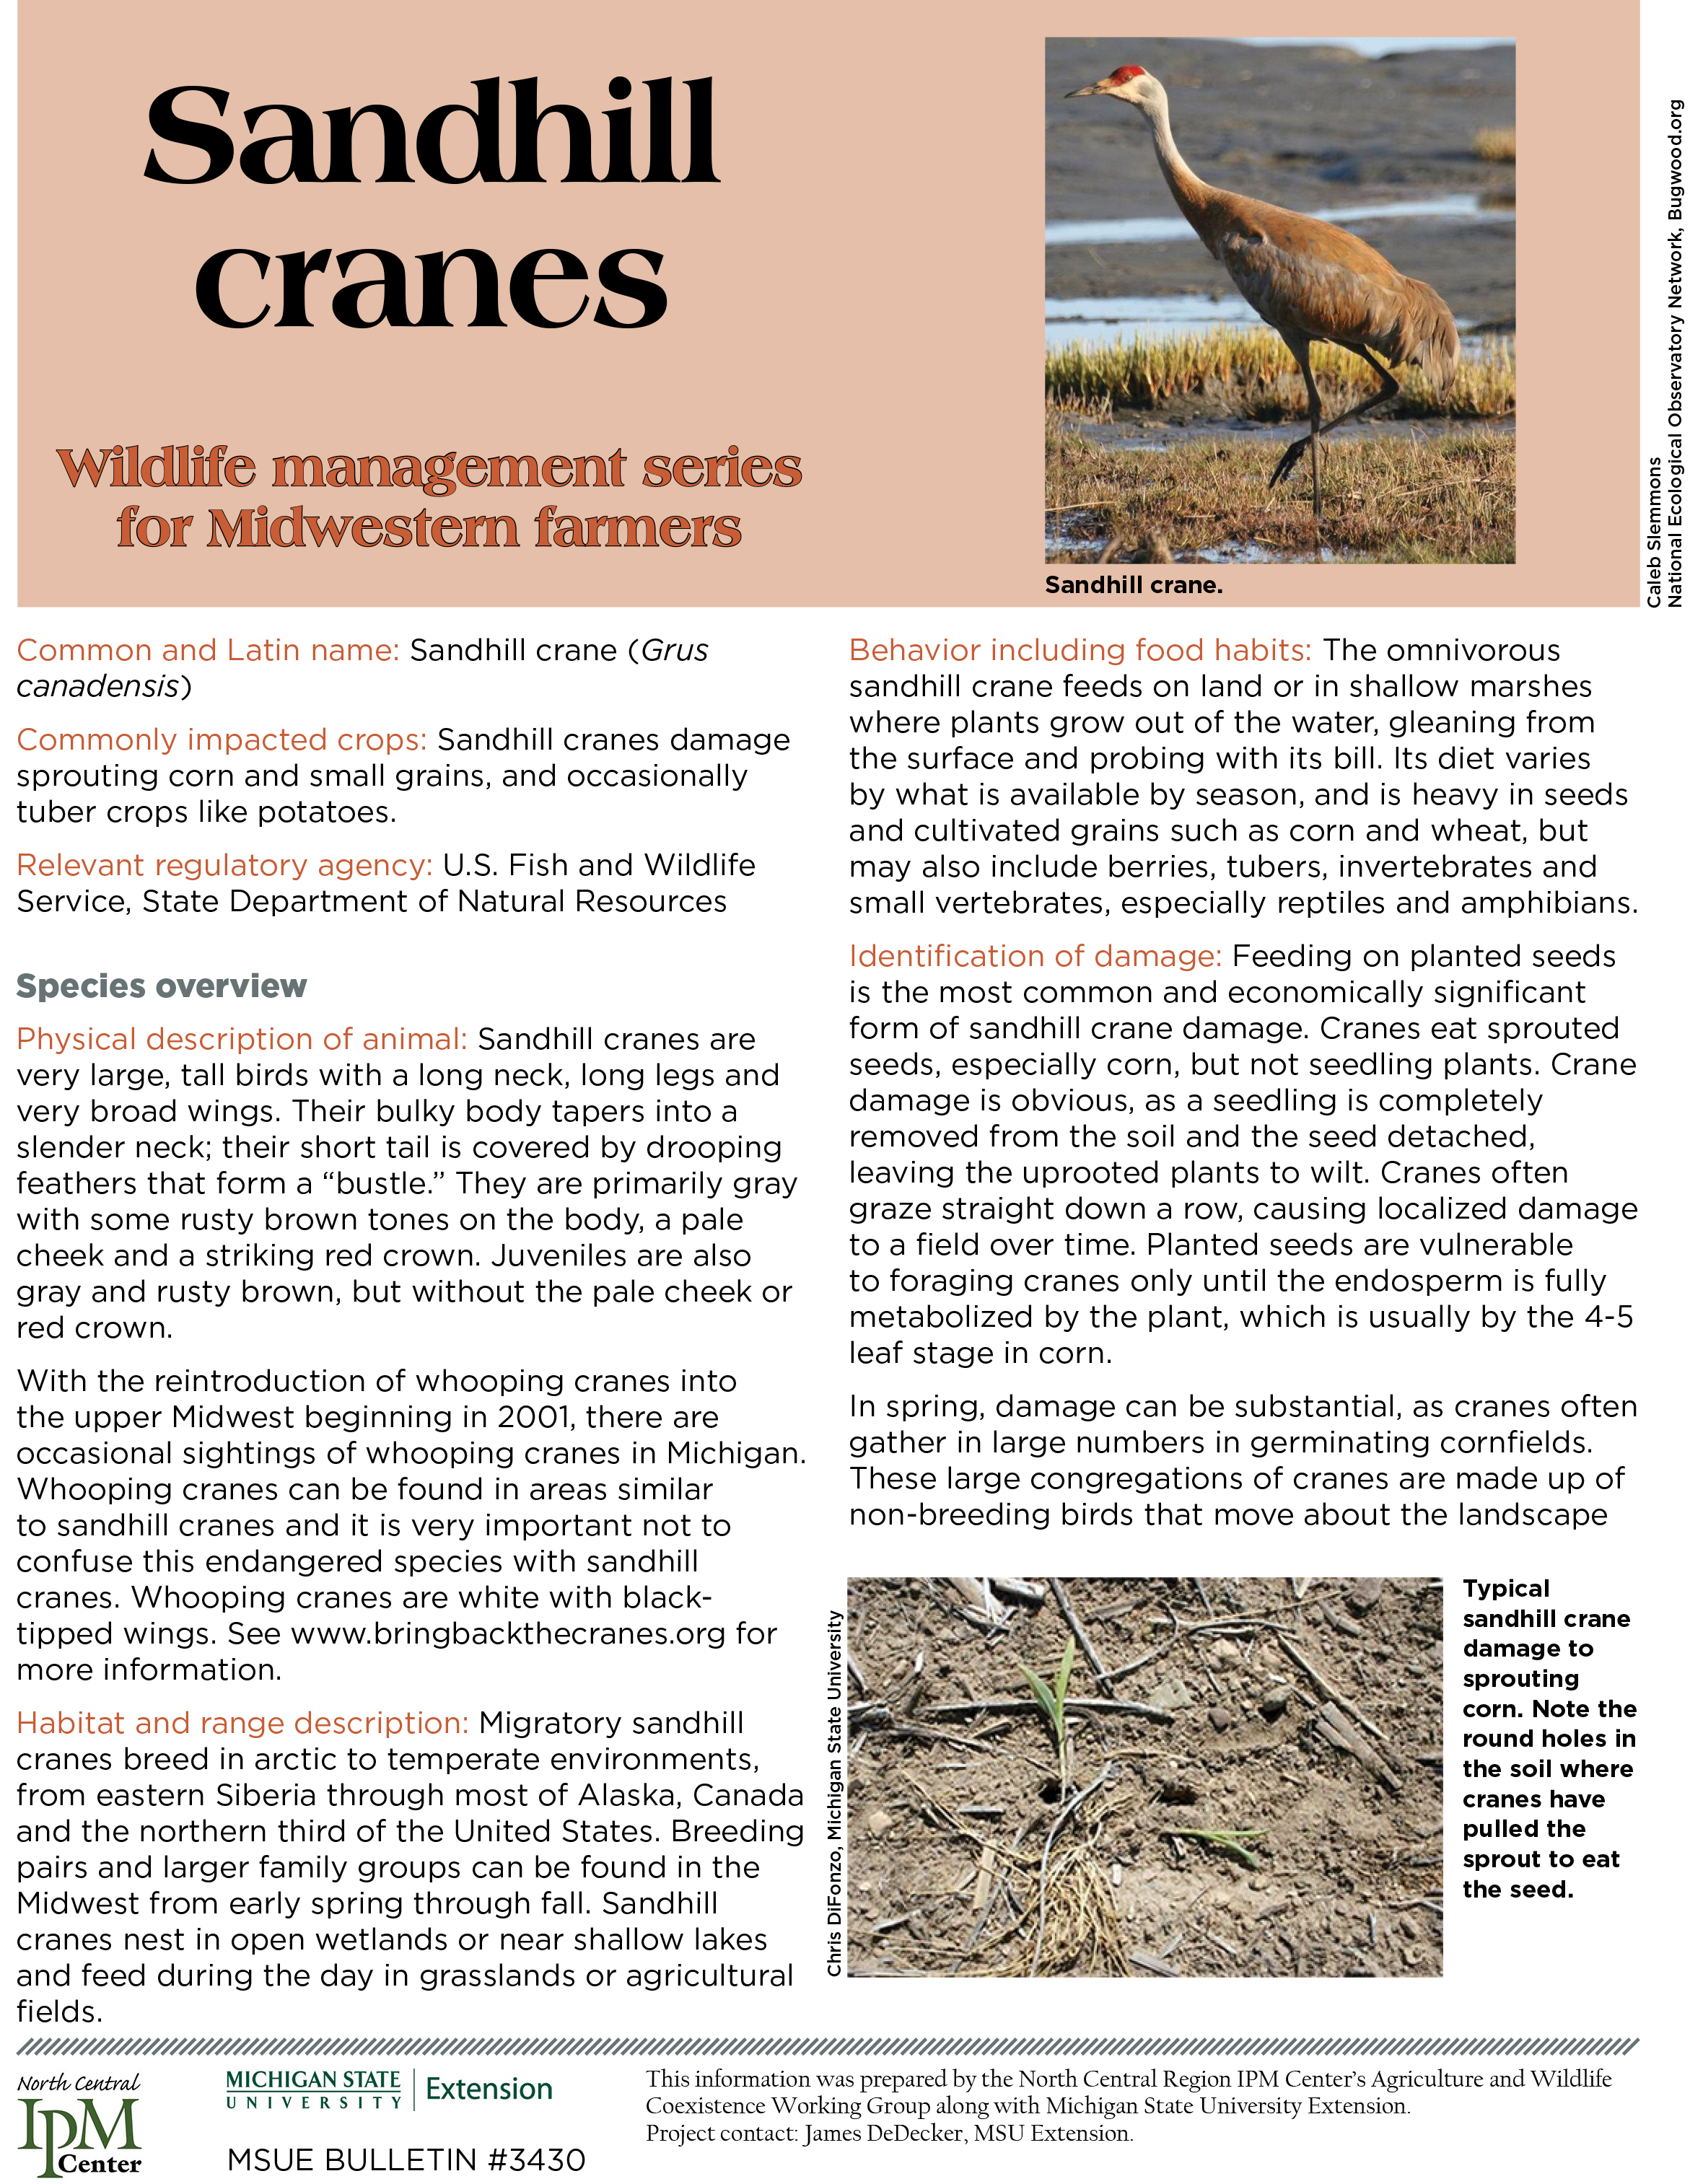 Farms that feed migrating sandhill cranes plan for conservation